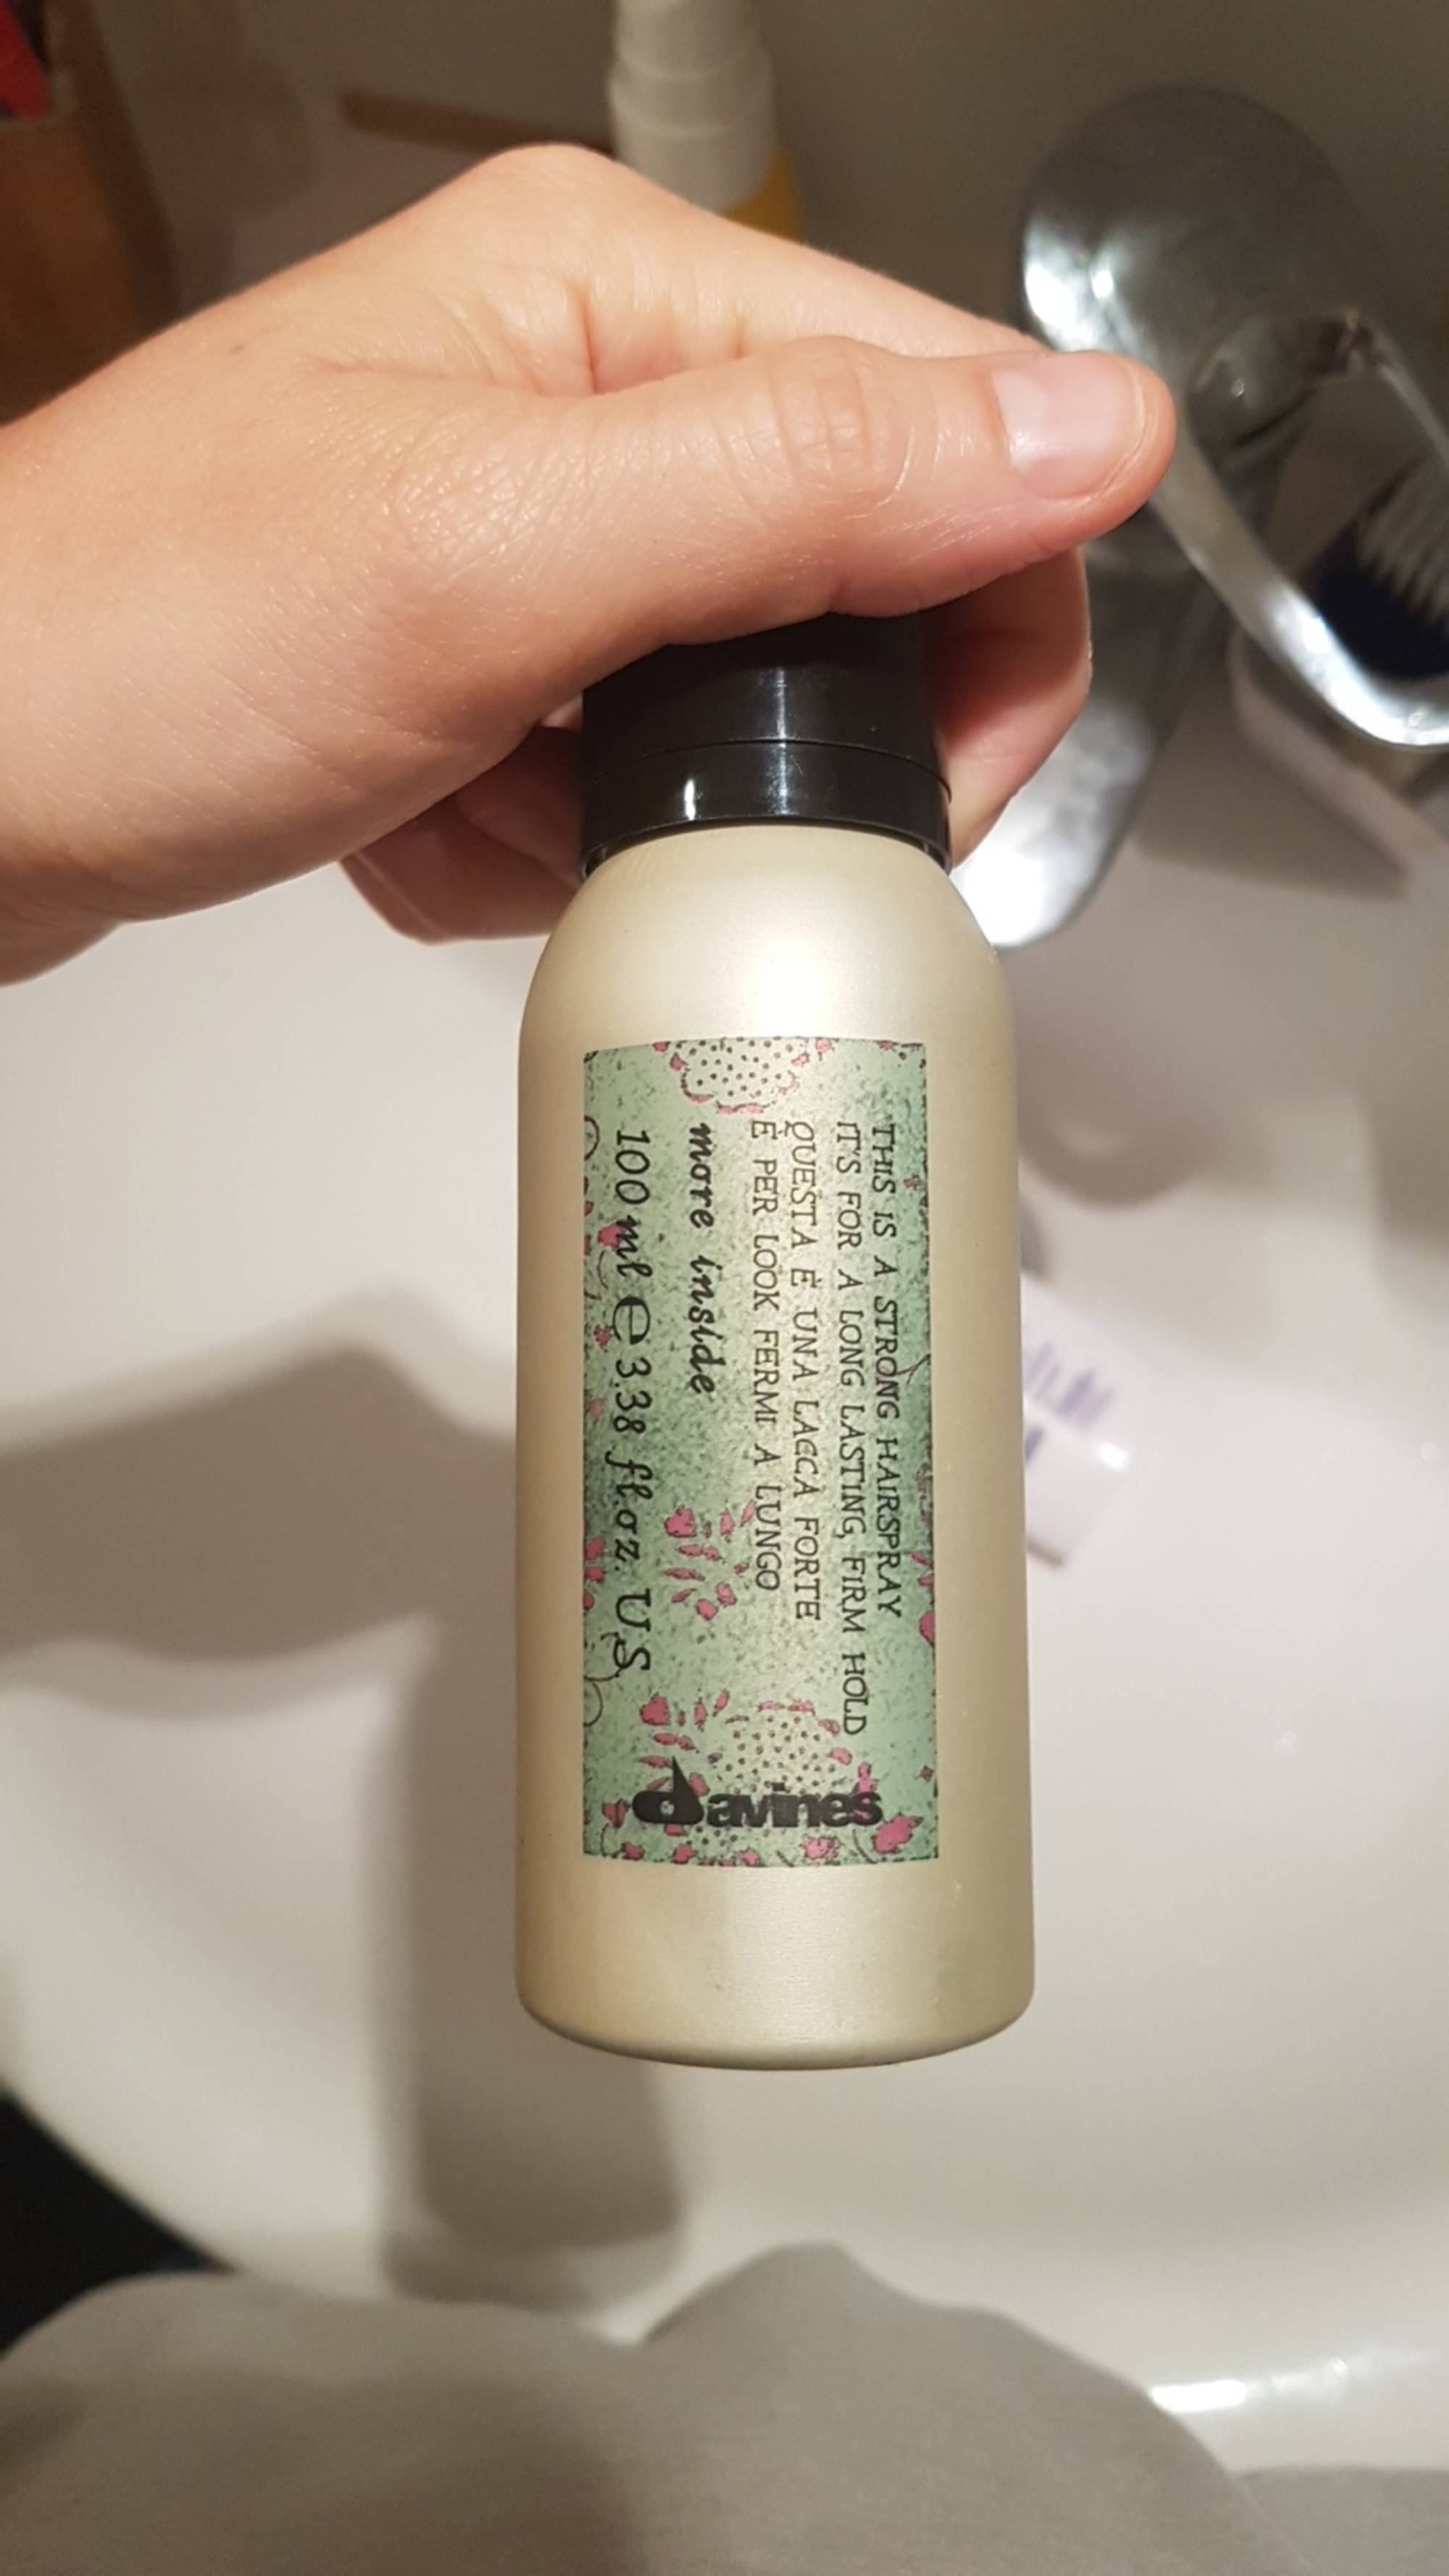 DAVINES - More inside - This is a strong hairspray